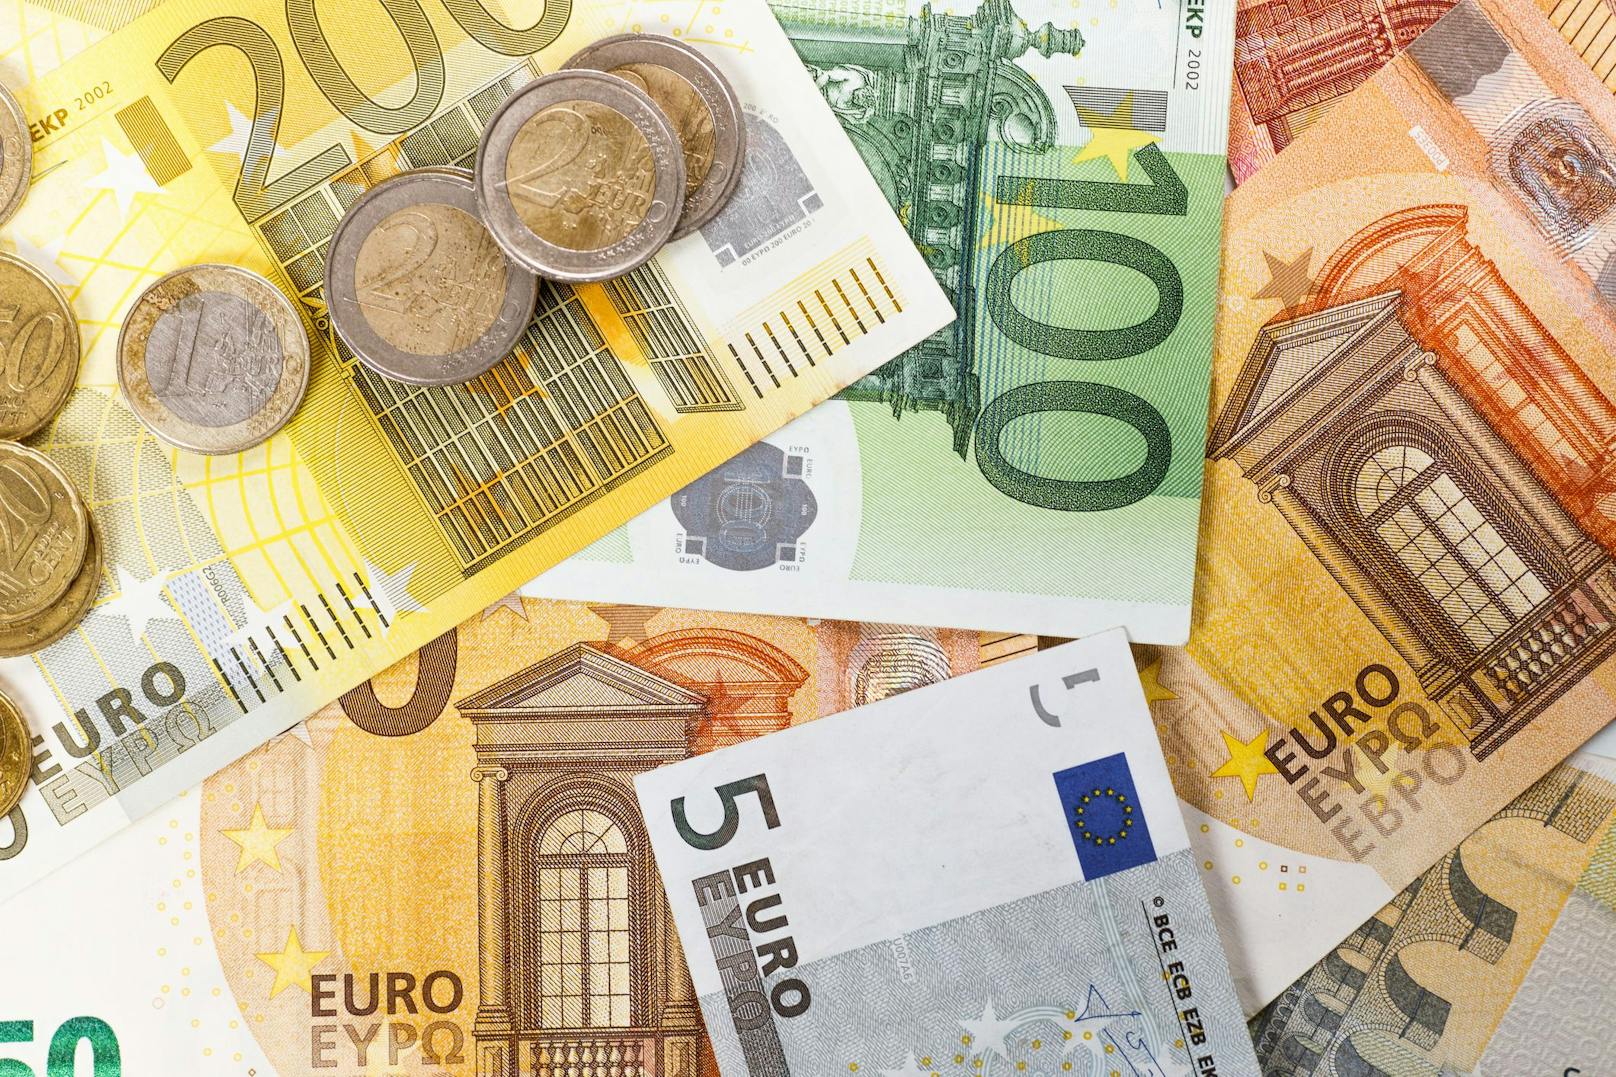 Money euro coins and banknotes